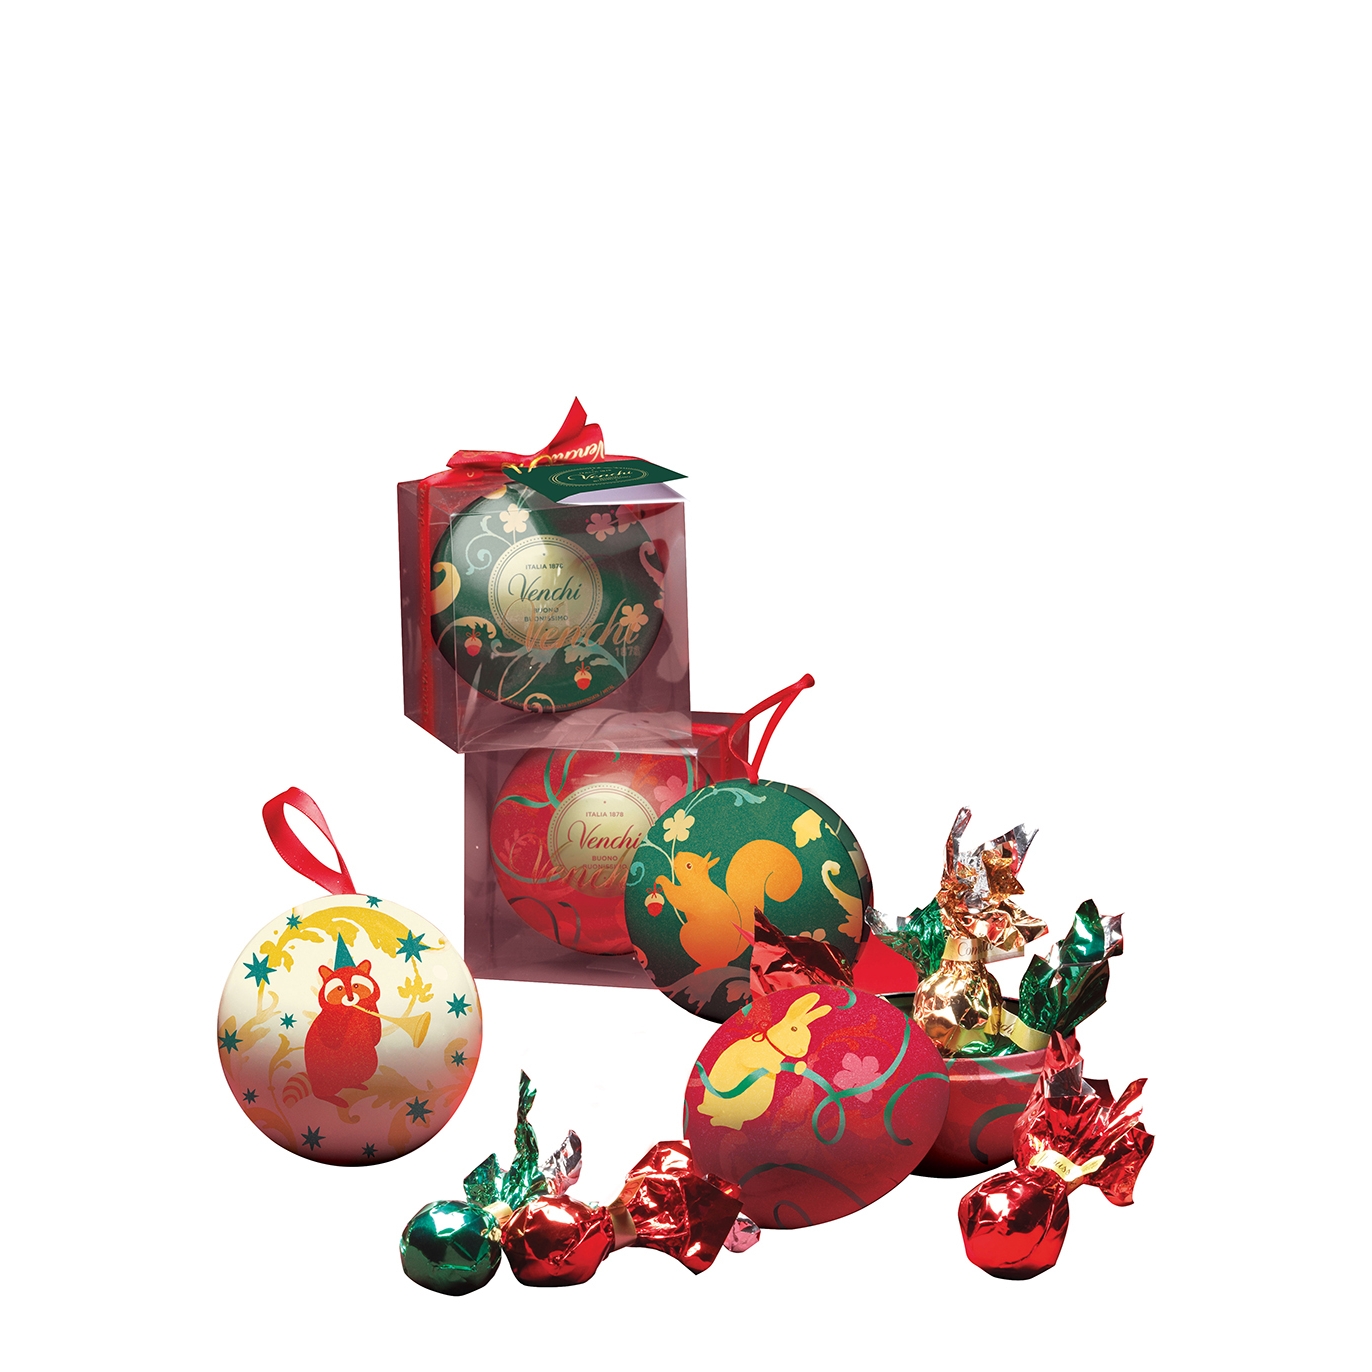 Venchi Chocolate-Filled Tin Christmas Bauble 49g